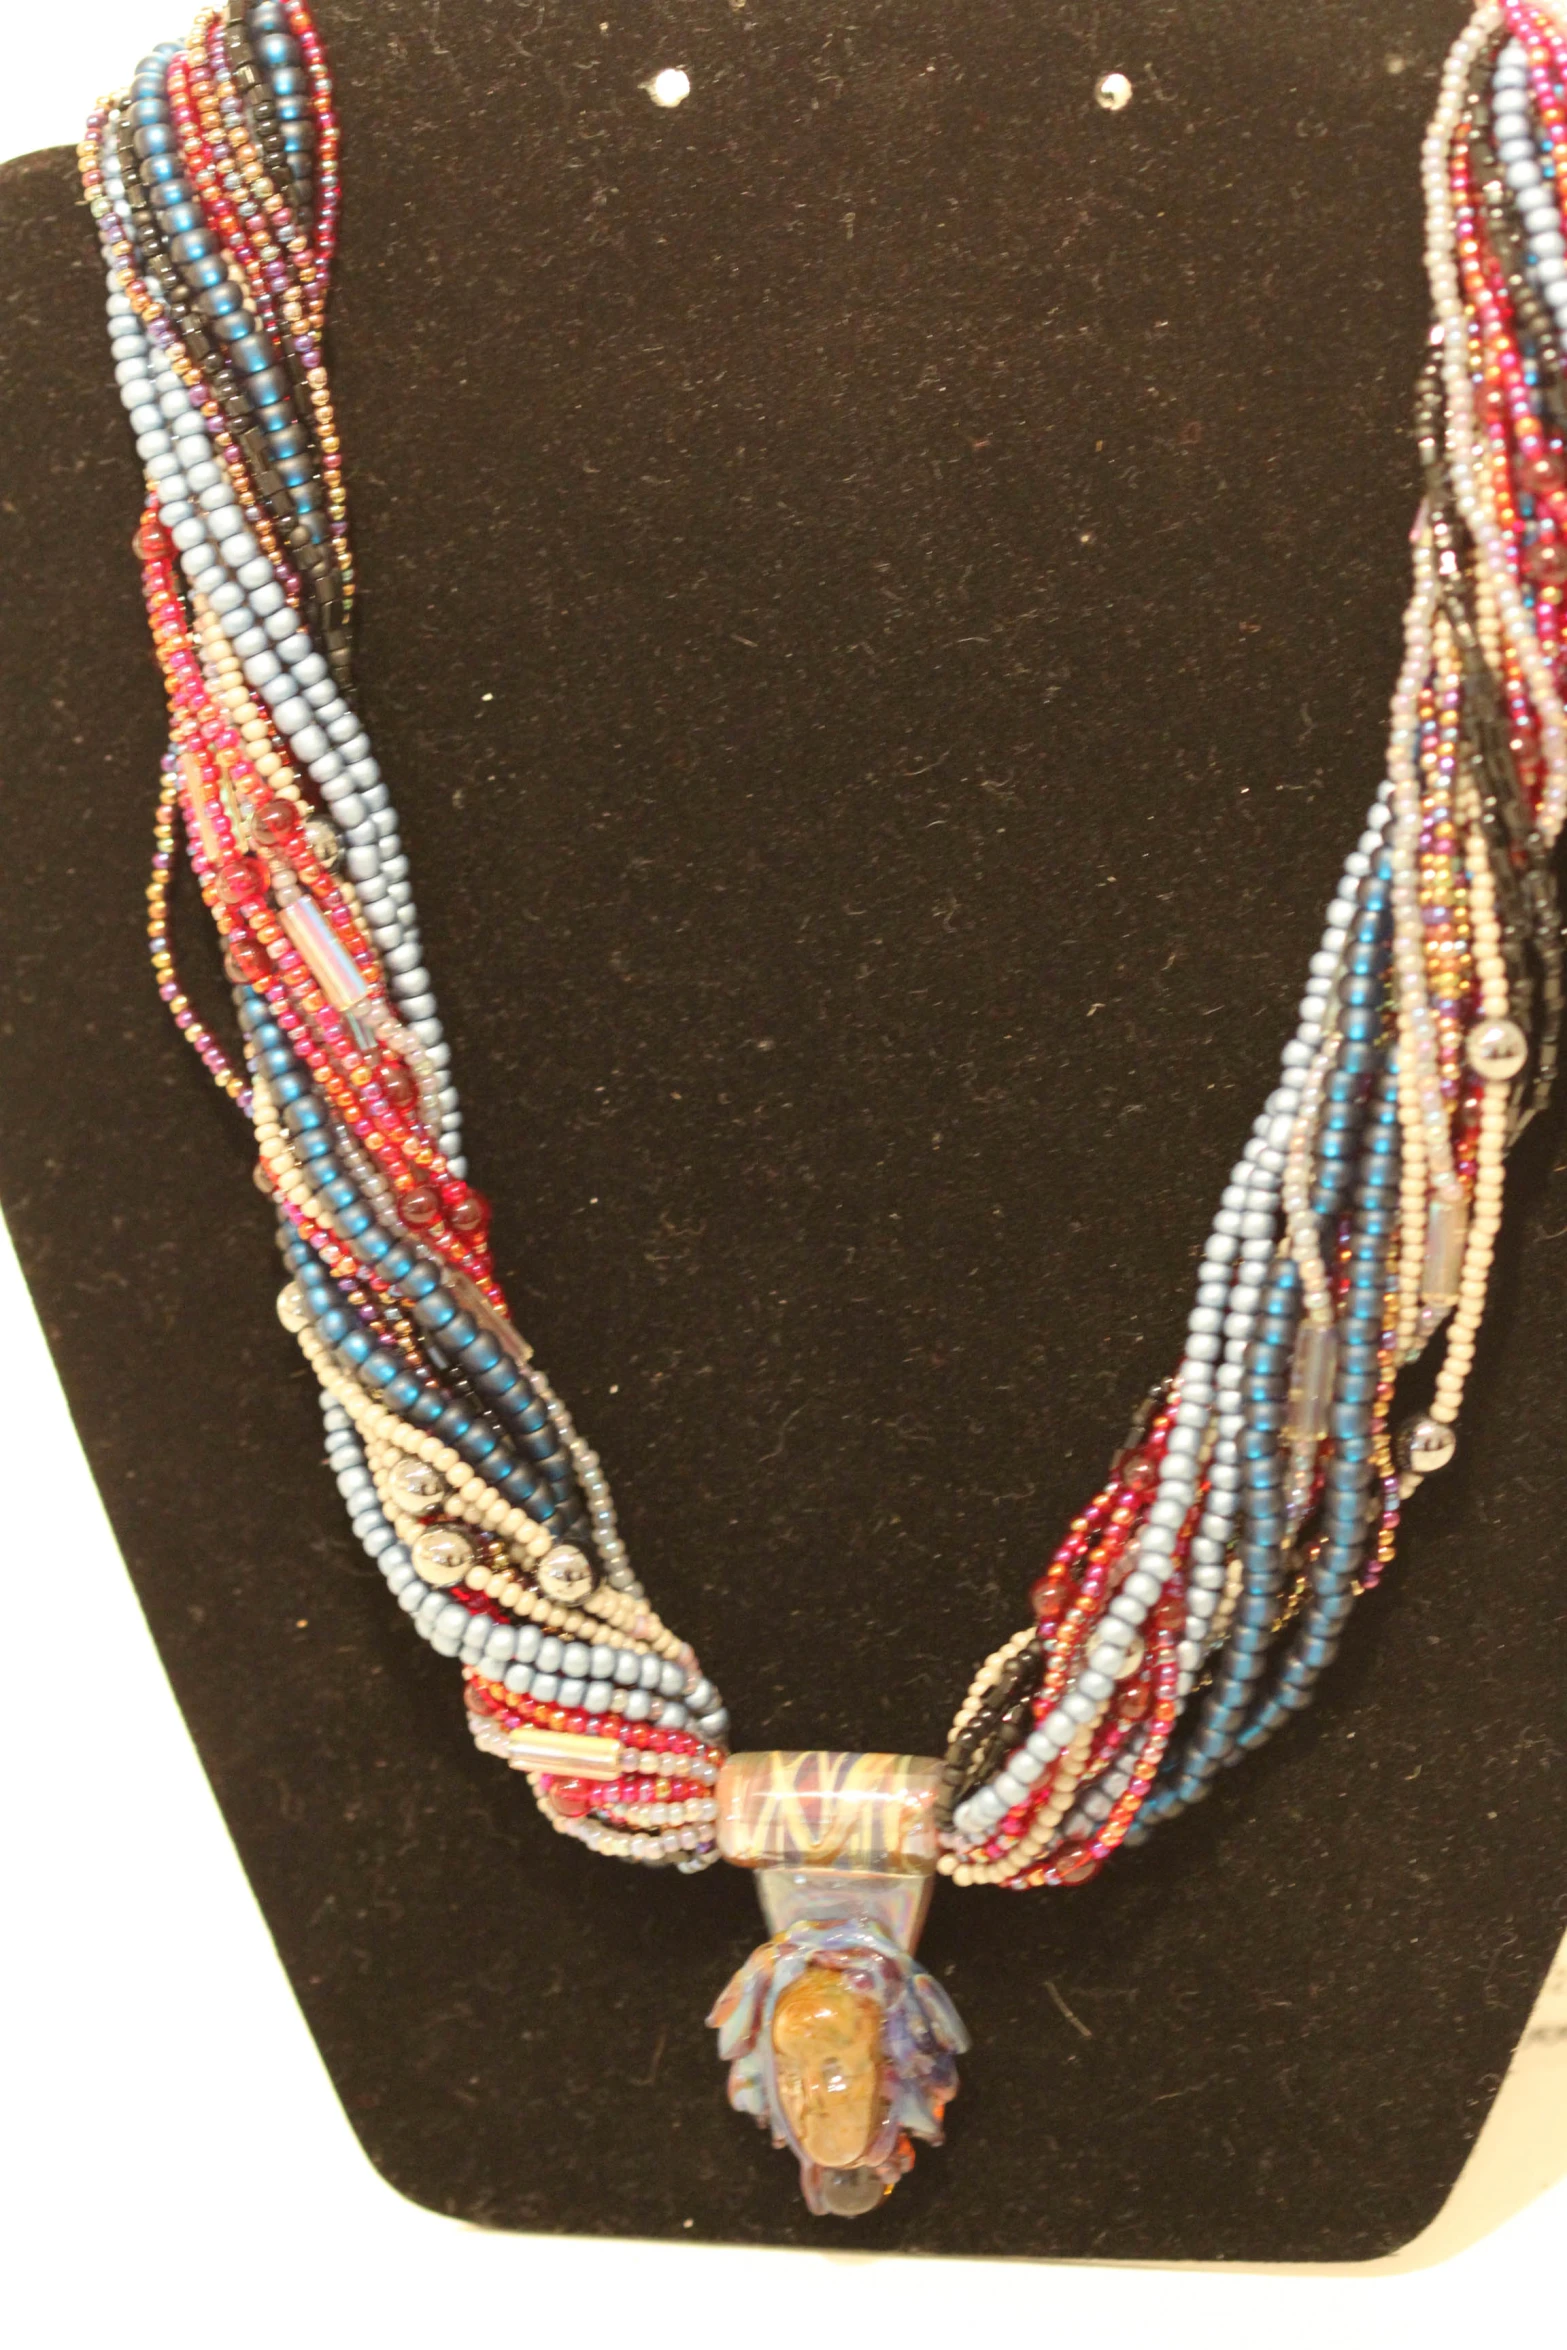 necklace is decorated with beads and an animal head